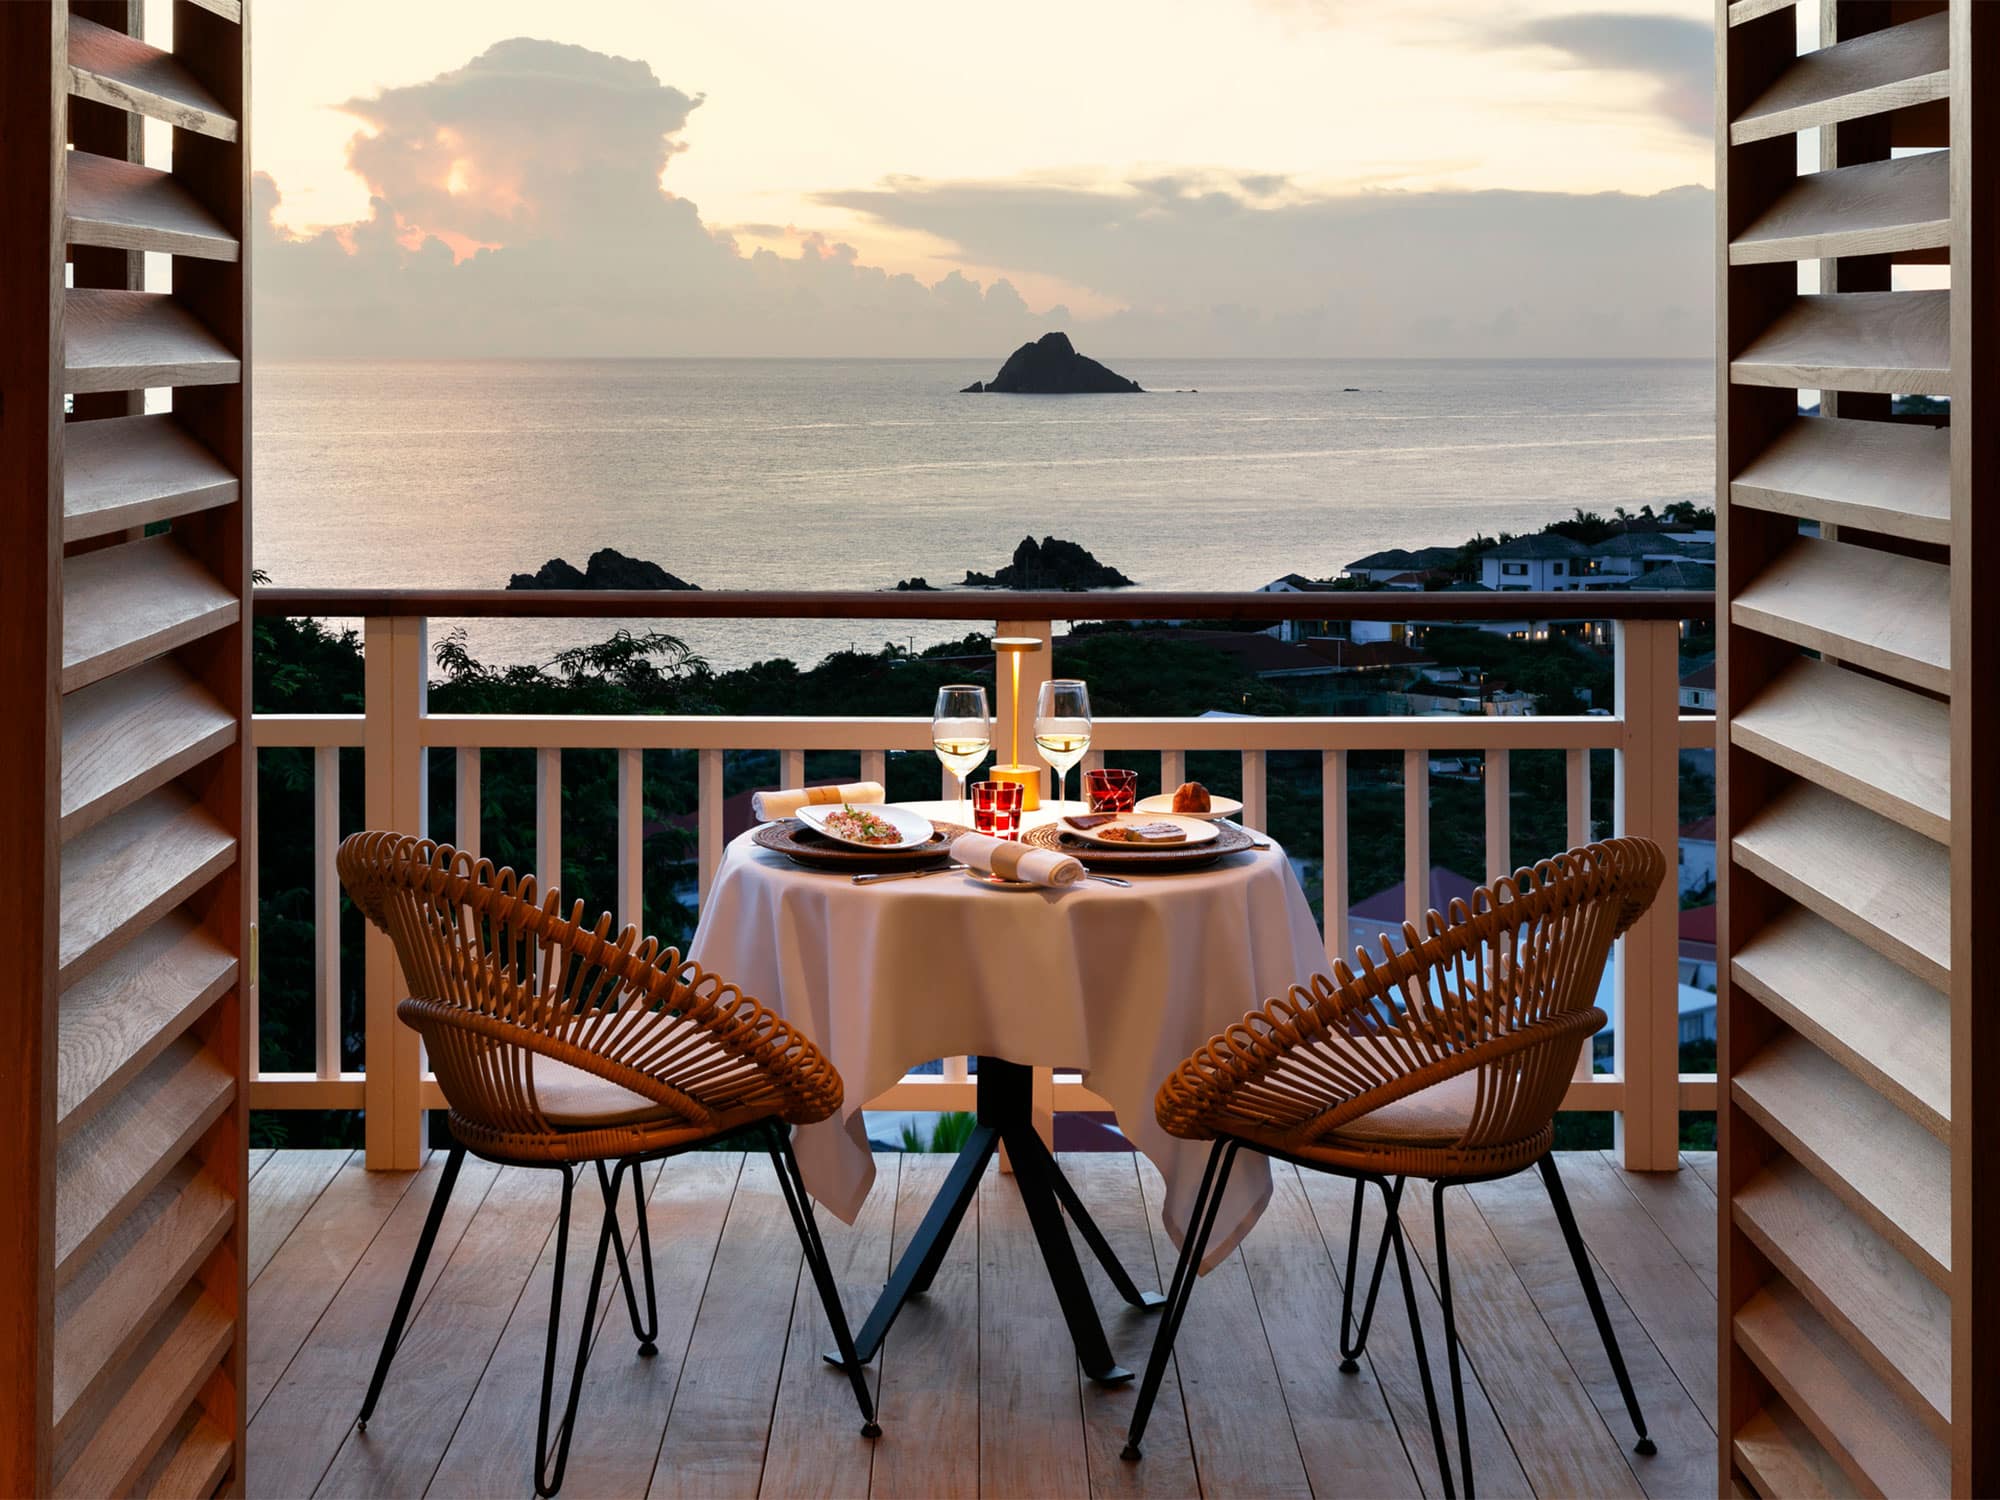 A private terrace at Hotel Barriere Le Carl Gustaf on the Caribbean island of St. Barth.